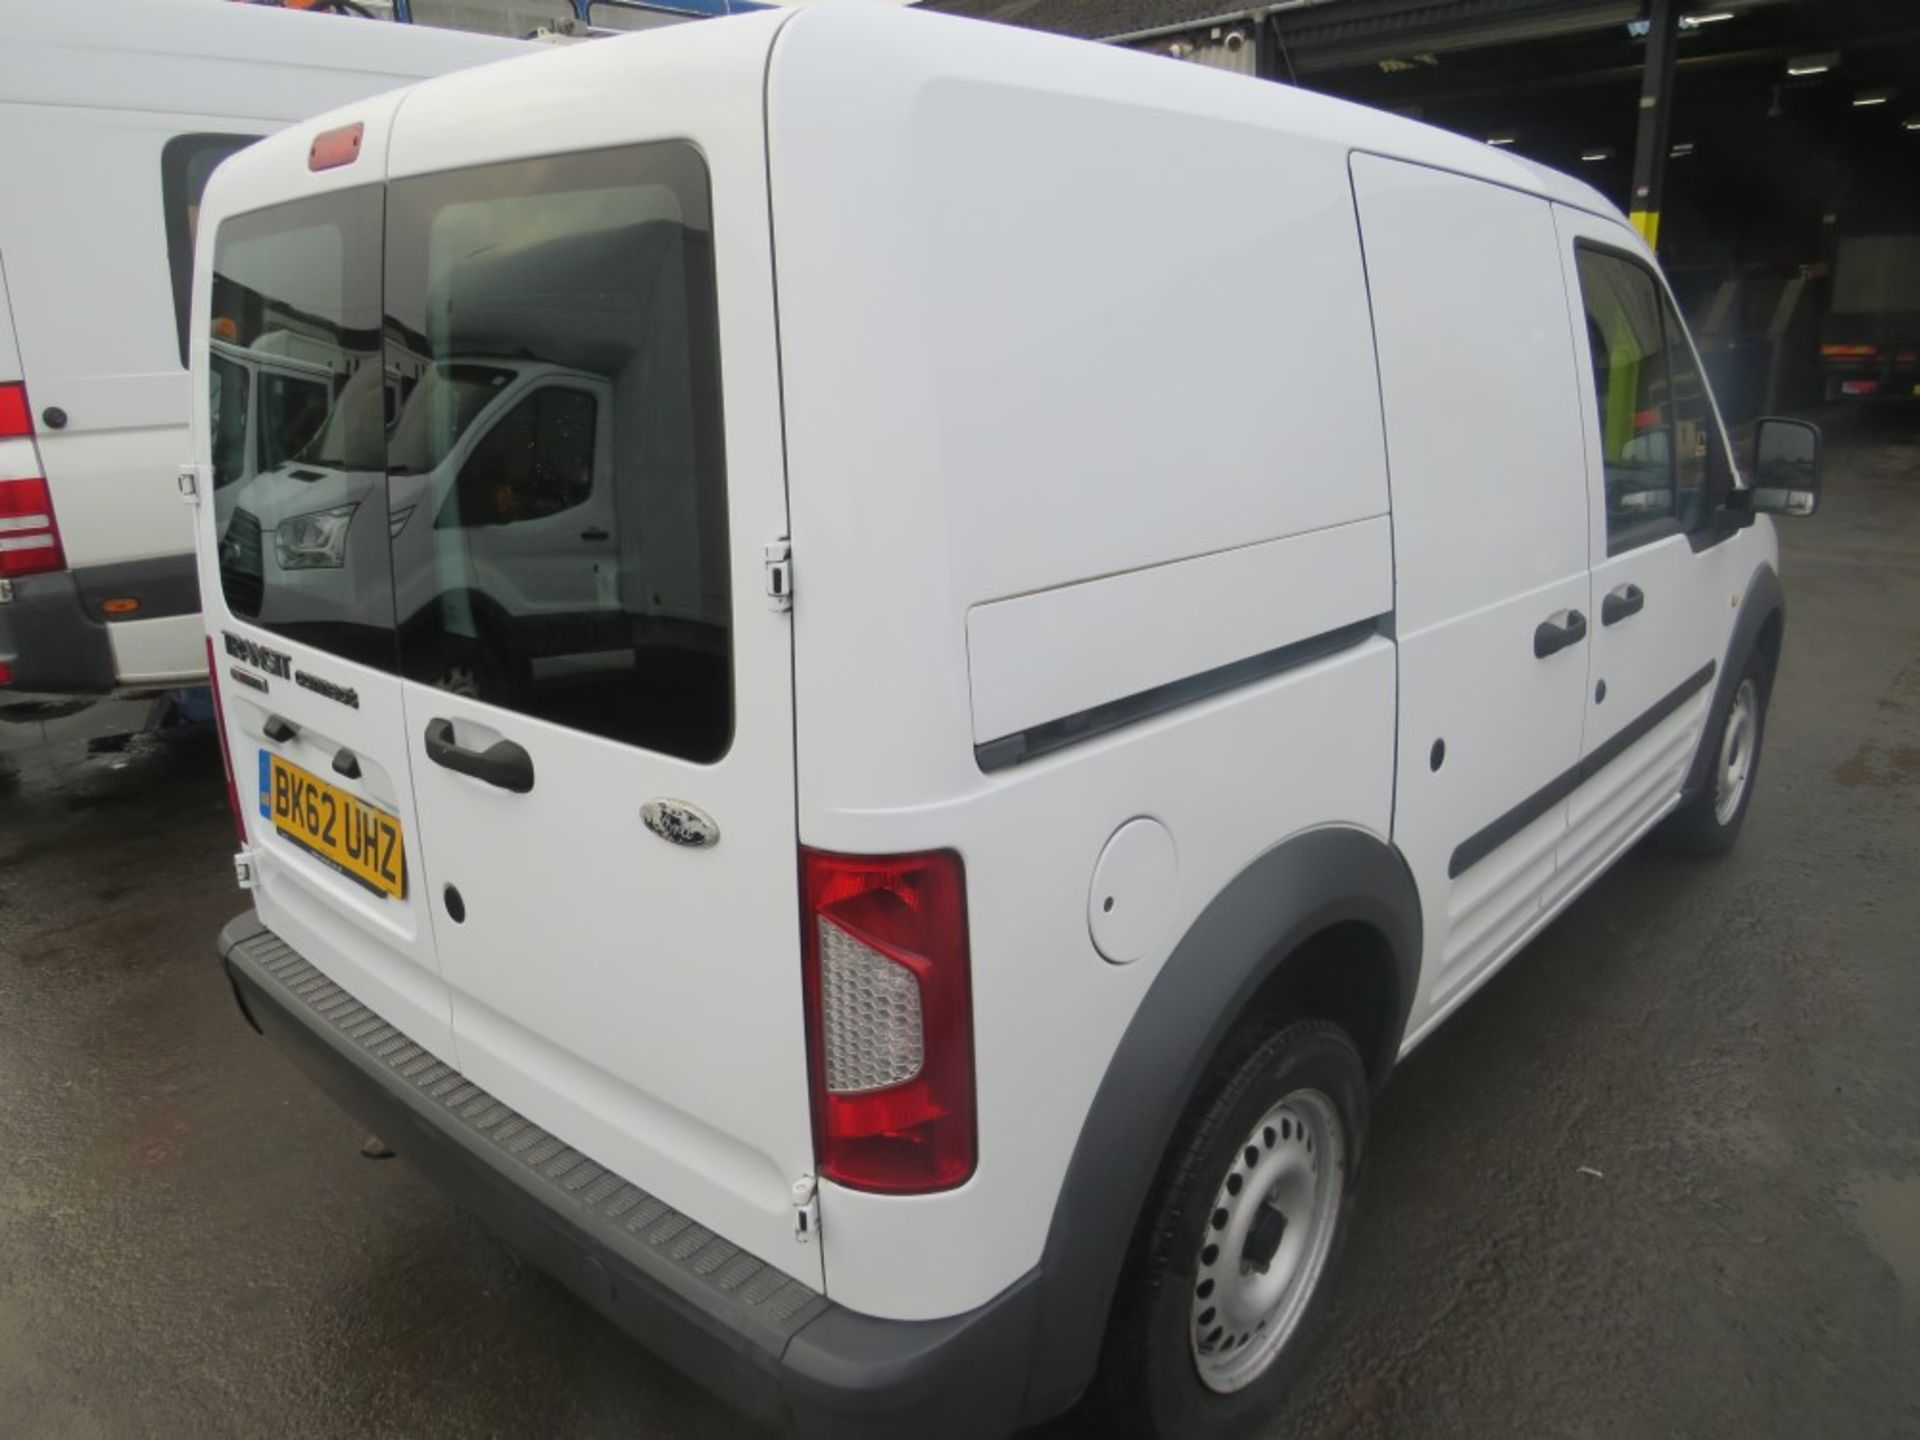 62 reg FORD TRANSIT CONNECT T220 CREW VAN, 1ST REG 10/12, 100065M WARRANTED, V5 HERE, 1 OWNER FROM - Image 4 of 7